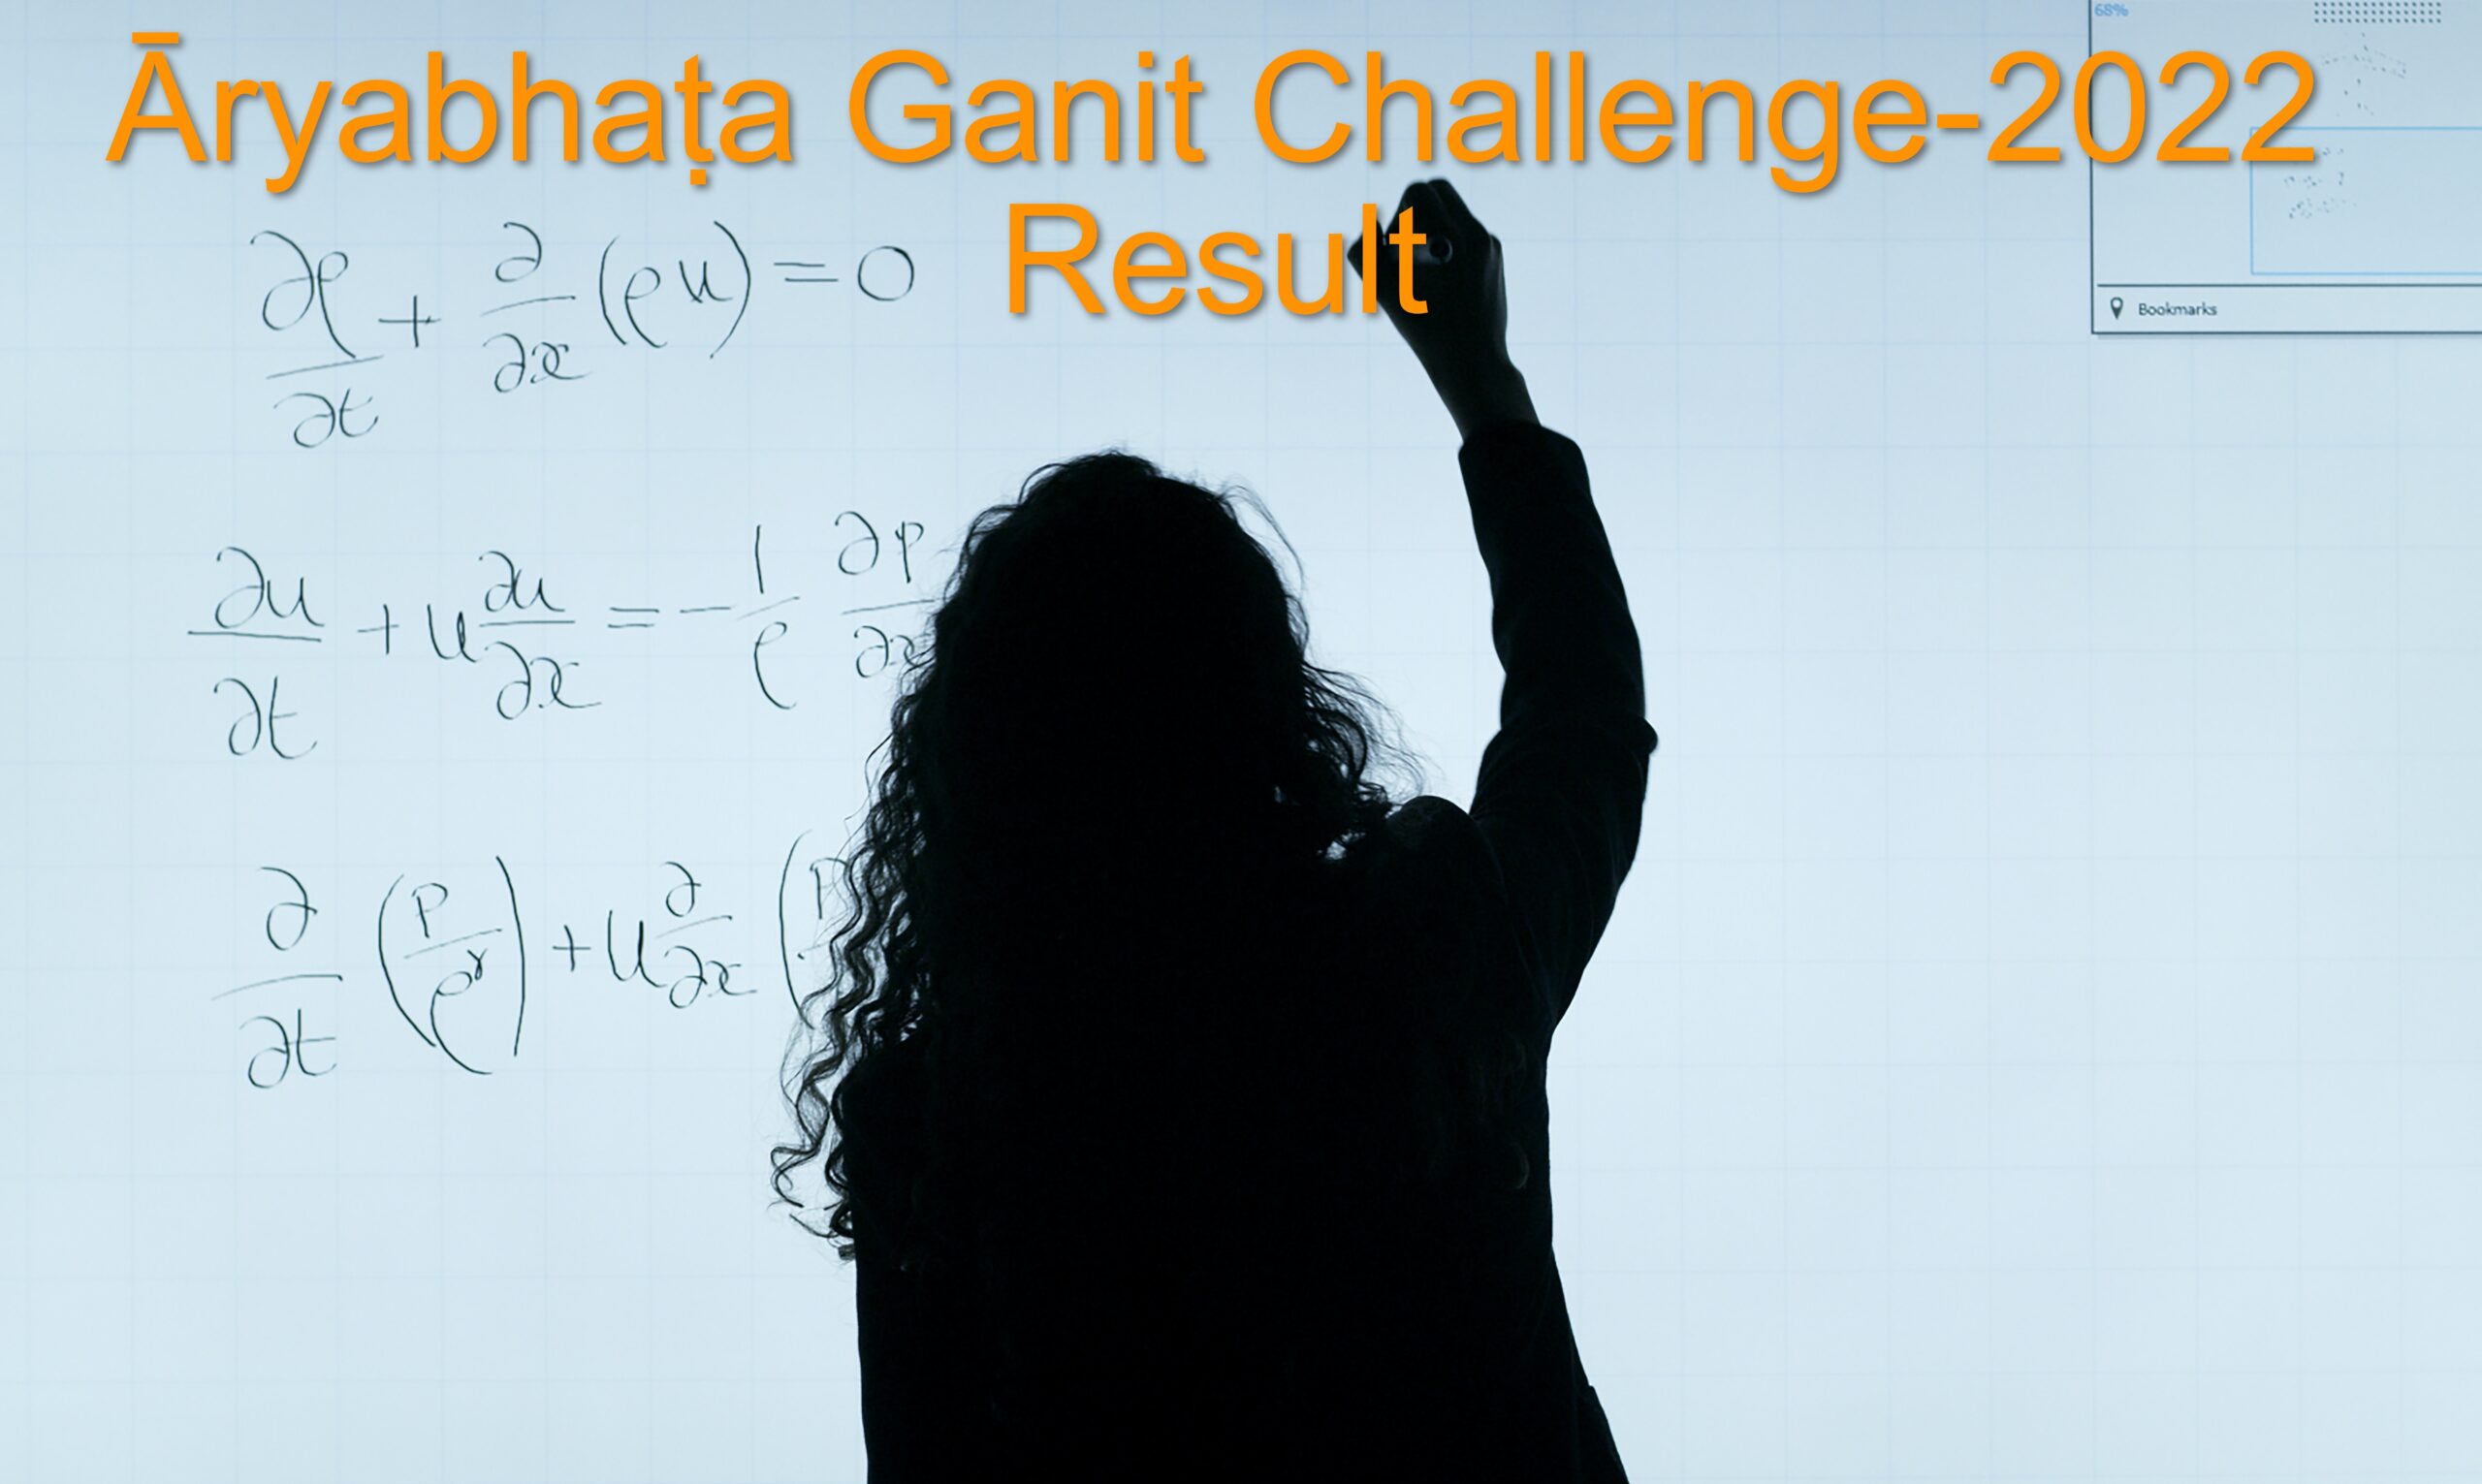 Revolutionary Maths Challenge Results Out! Who Topped the Āryabhaṭa Ganit Challenge-2022?